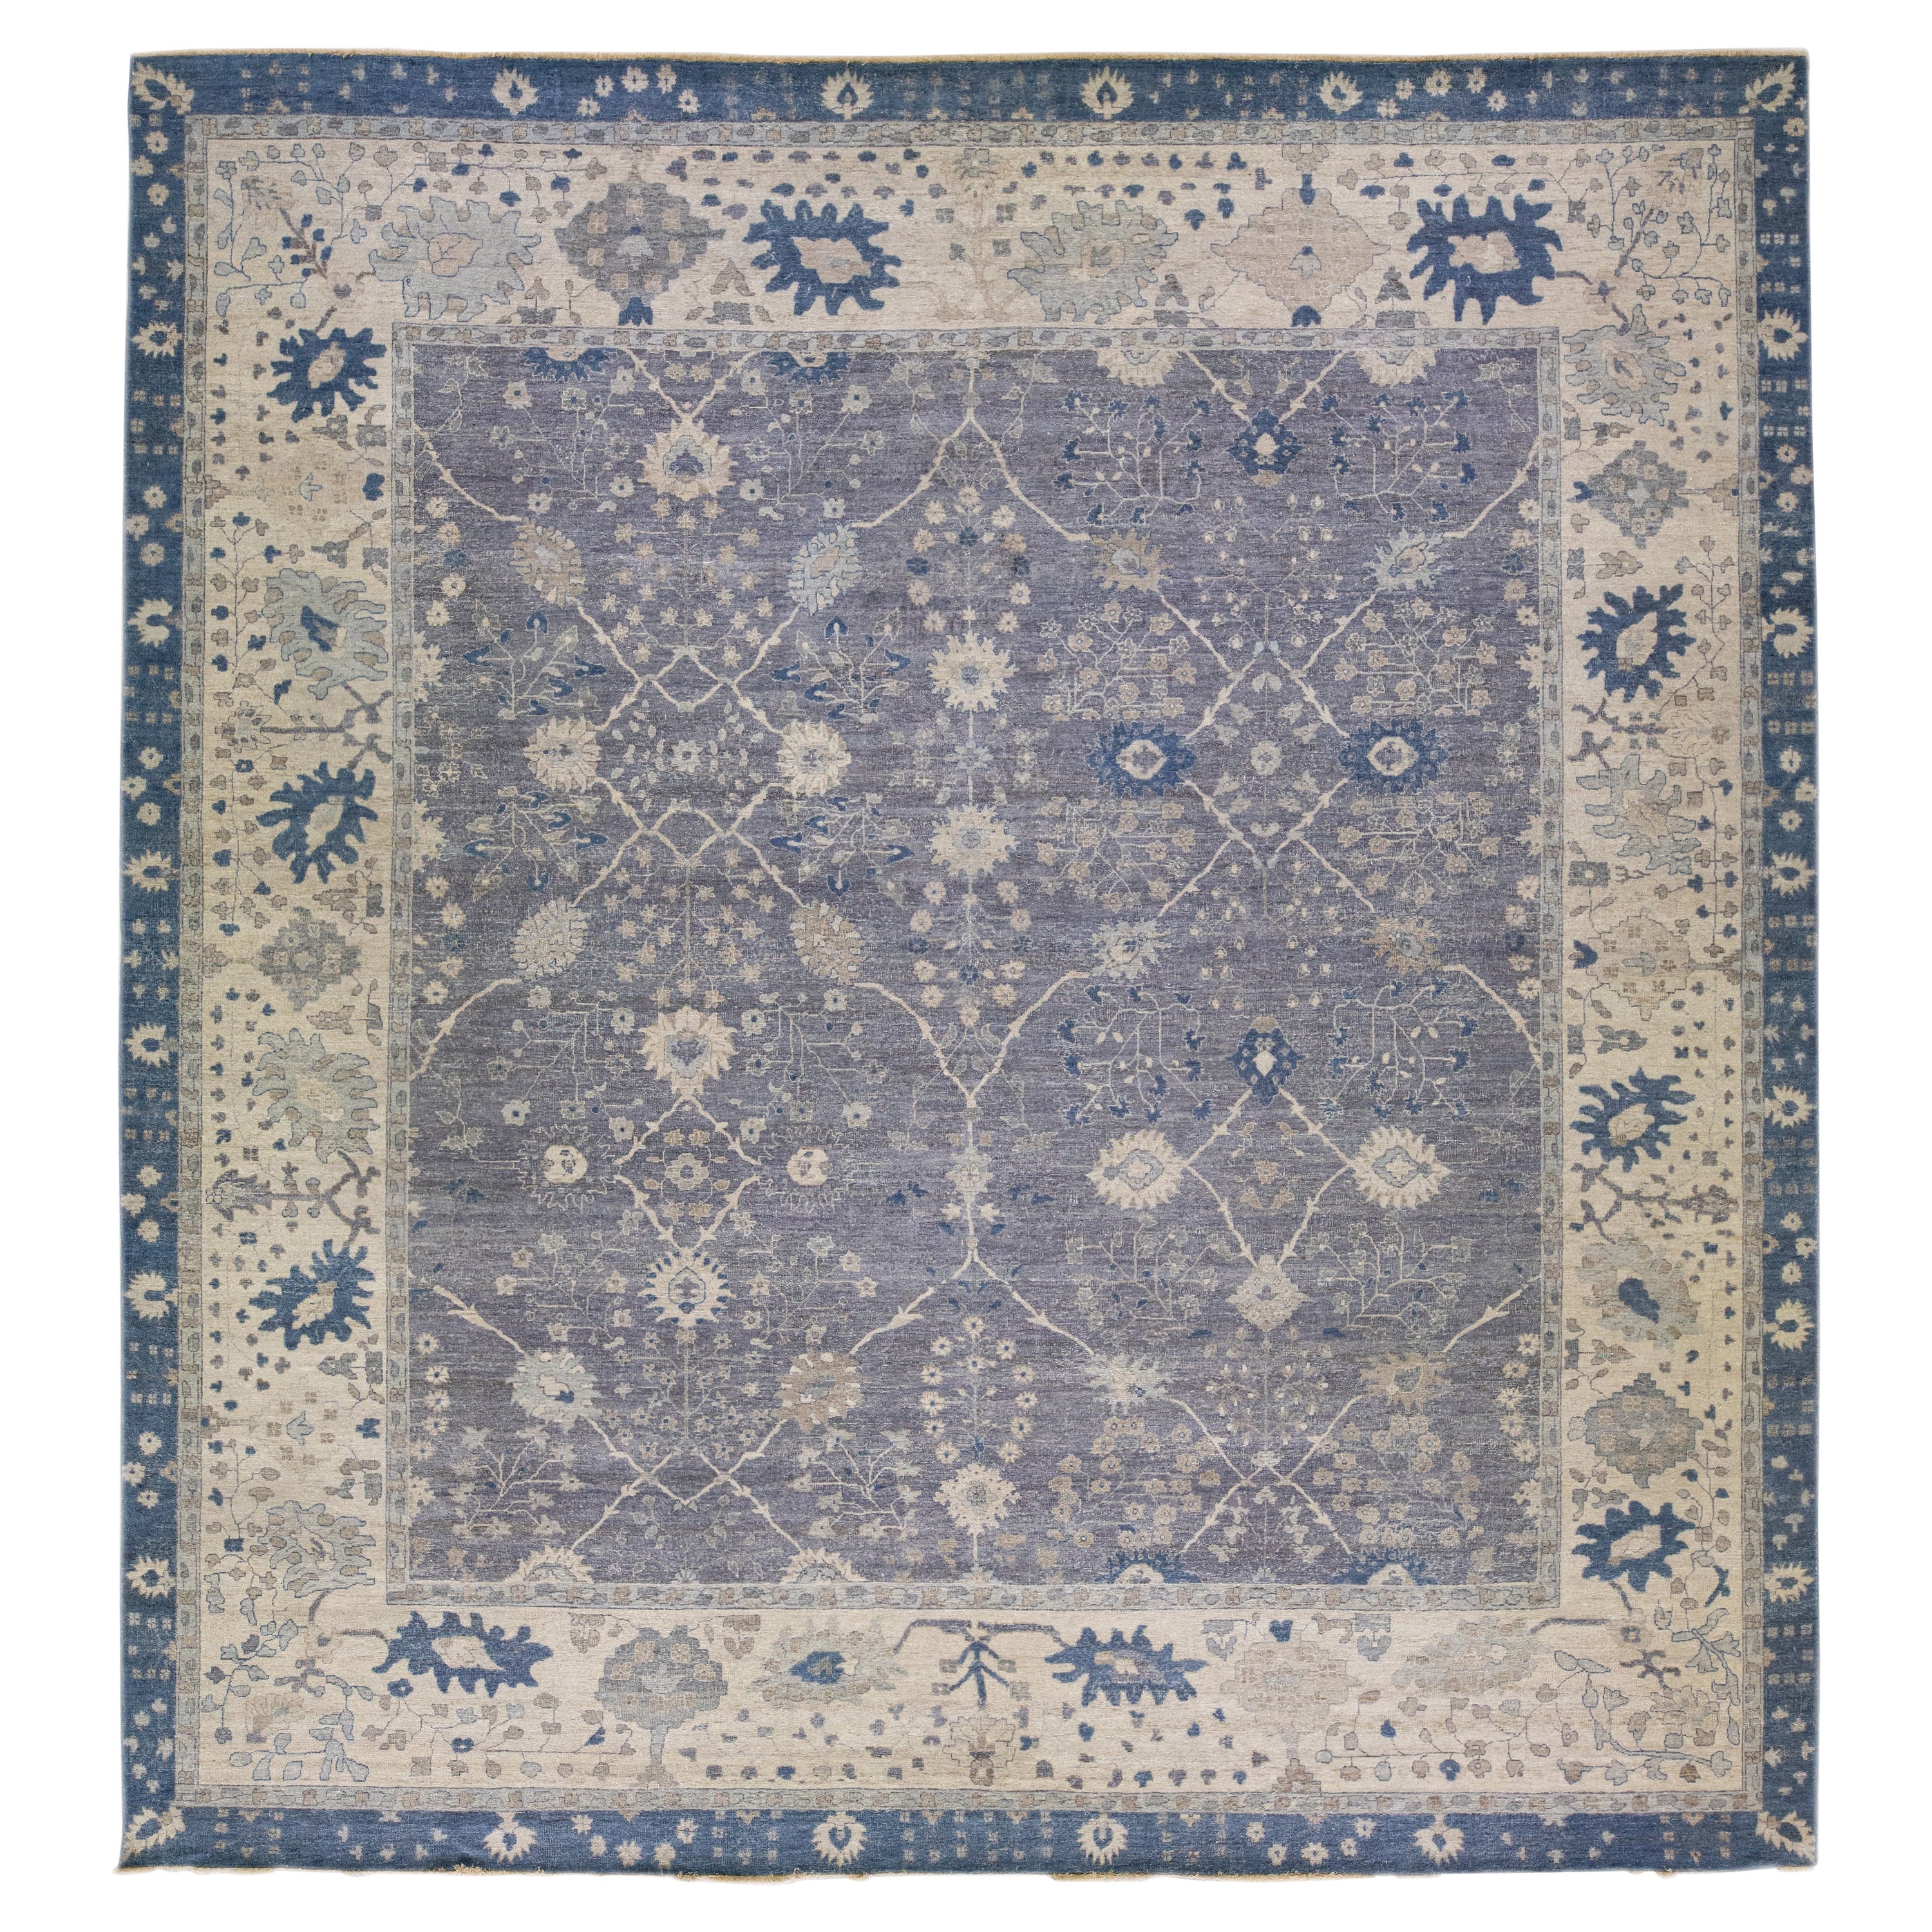 Modern Indian Mahal Square Wool Rug in Gray With Floral Motif by Apadana